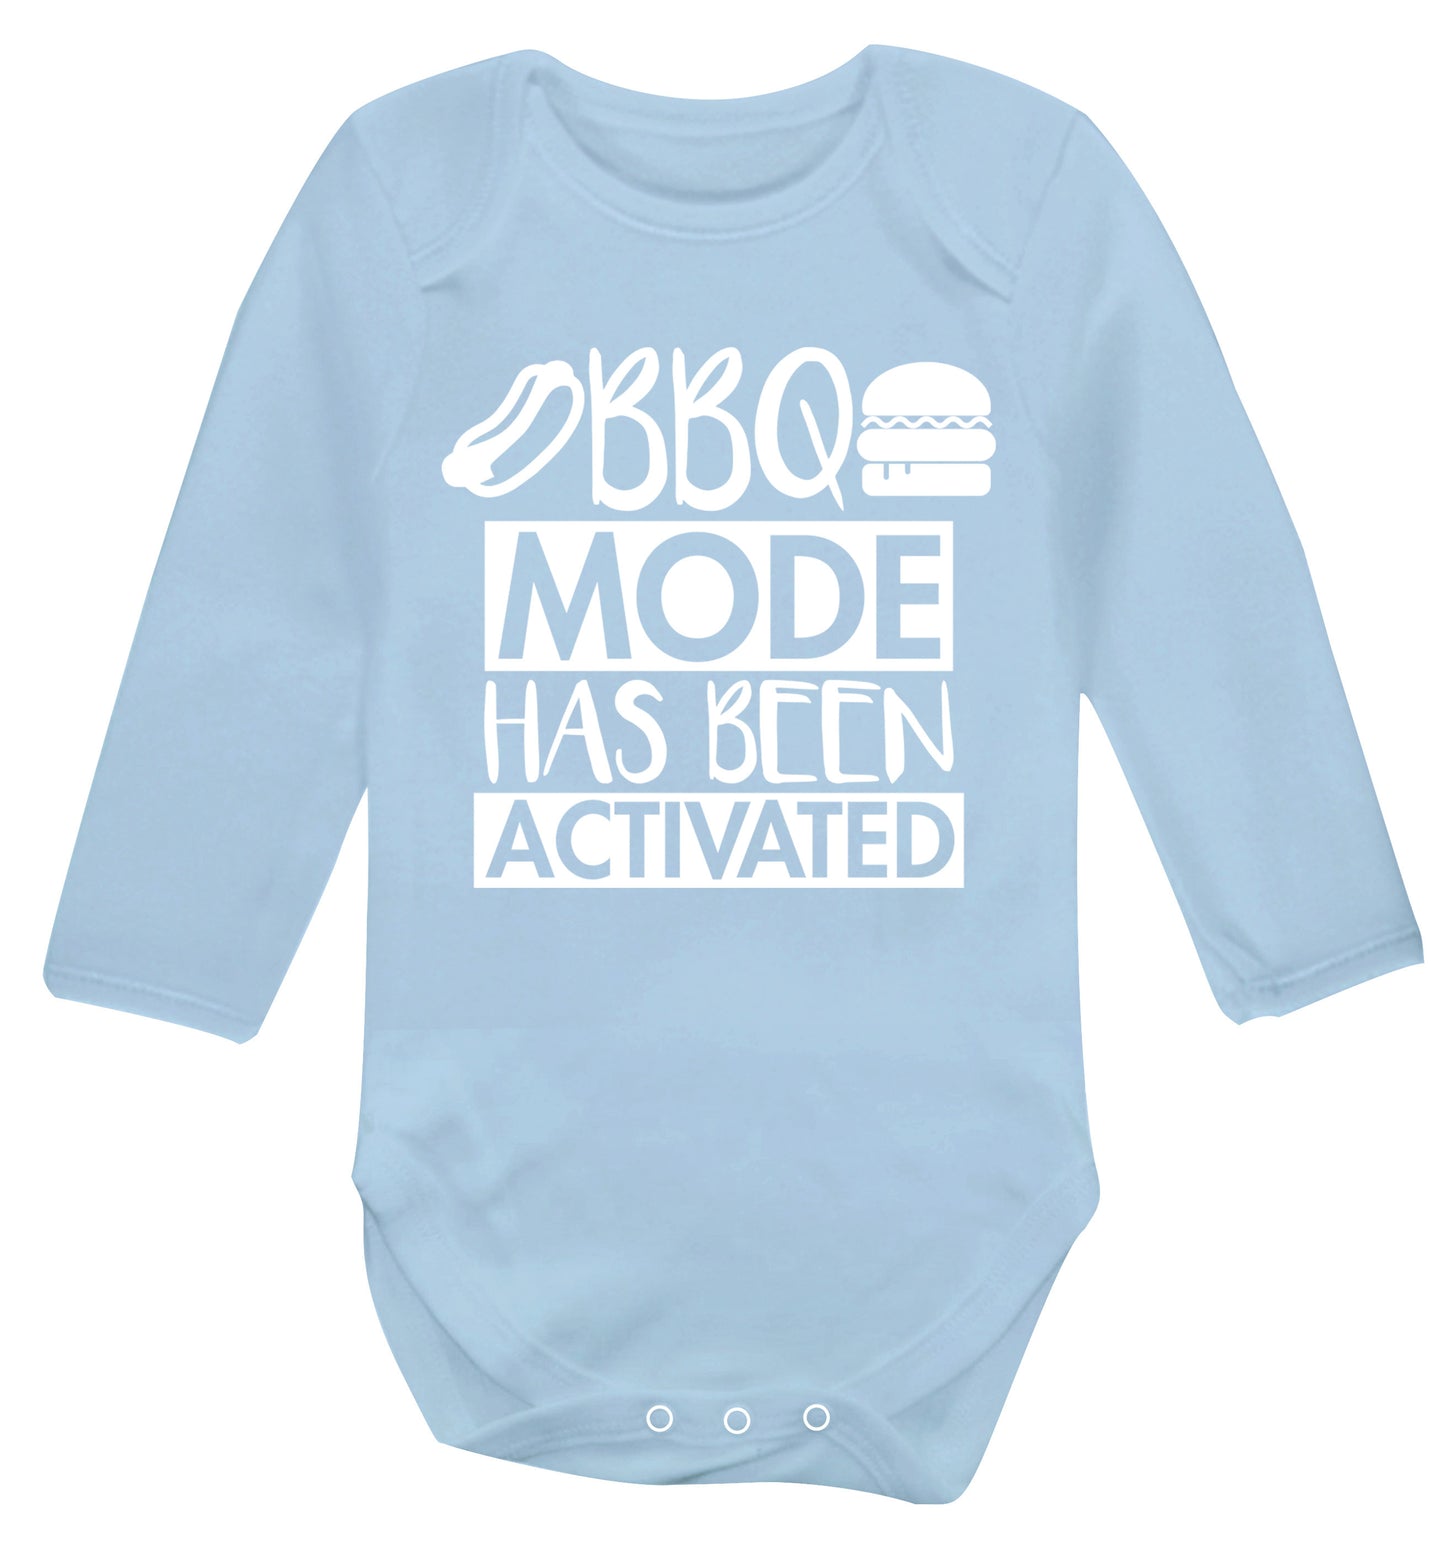 Bbq mode has been activated Baby Vest long sleeved pale blue 6-12 months